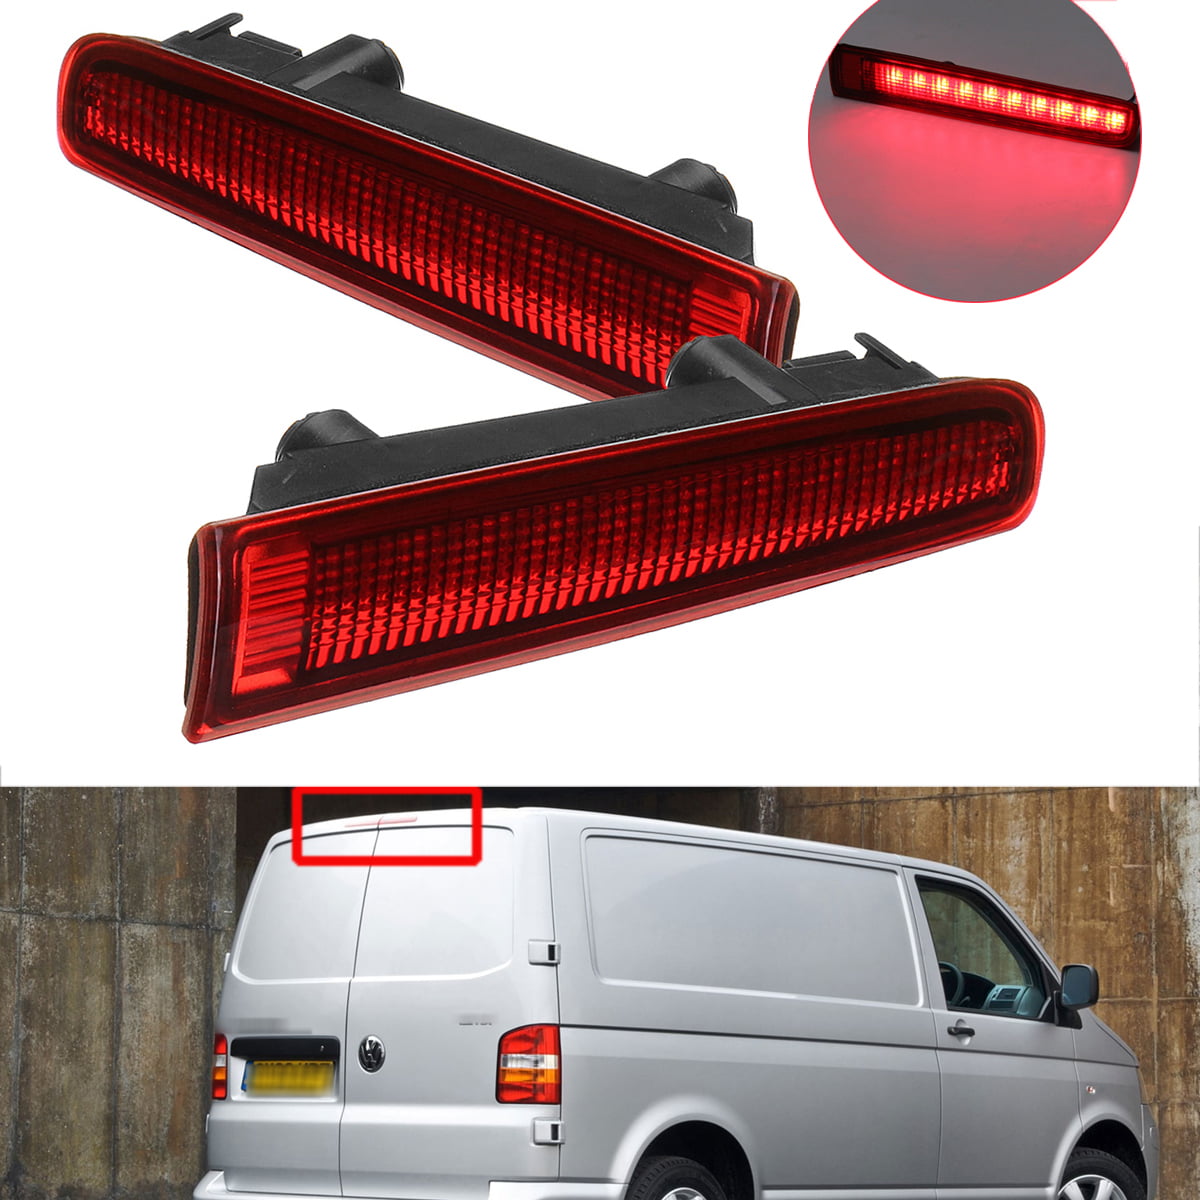 LED Rear High Level Third Stop Lamp Left OR Right For VW Transporter T5 T6 | Walmart Canada